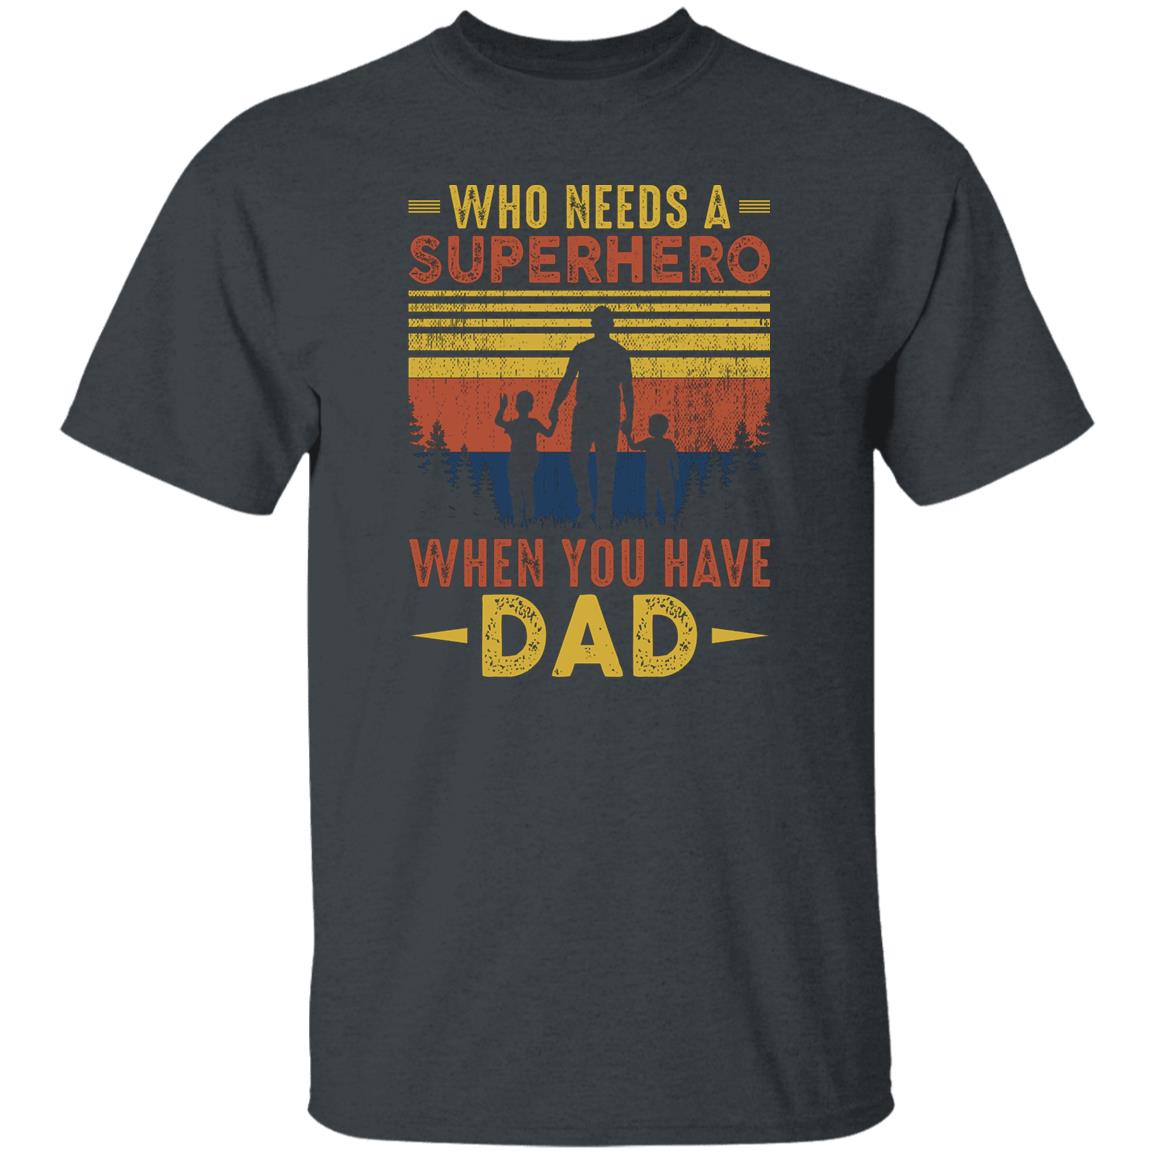 Who Needs a Superhero When You Have Dad Tshirt